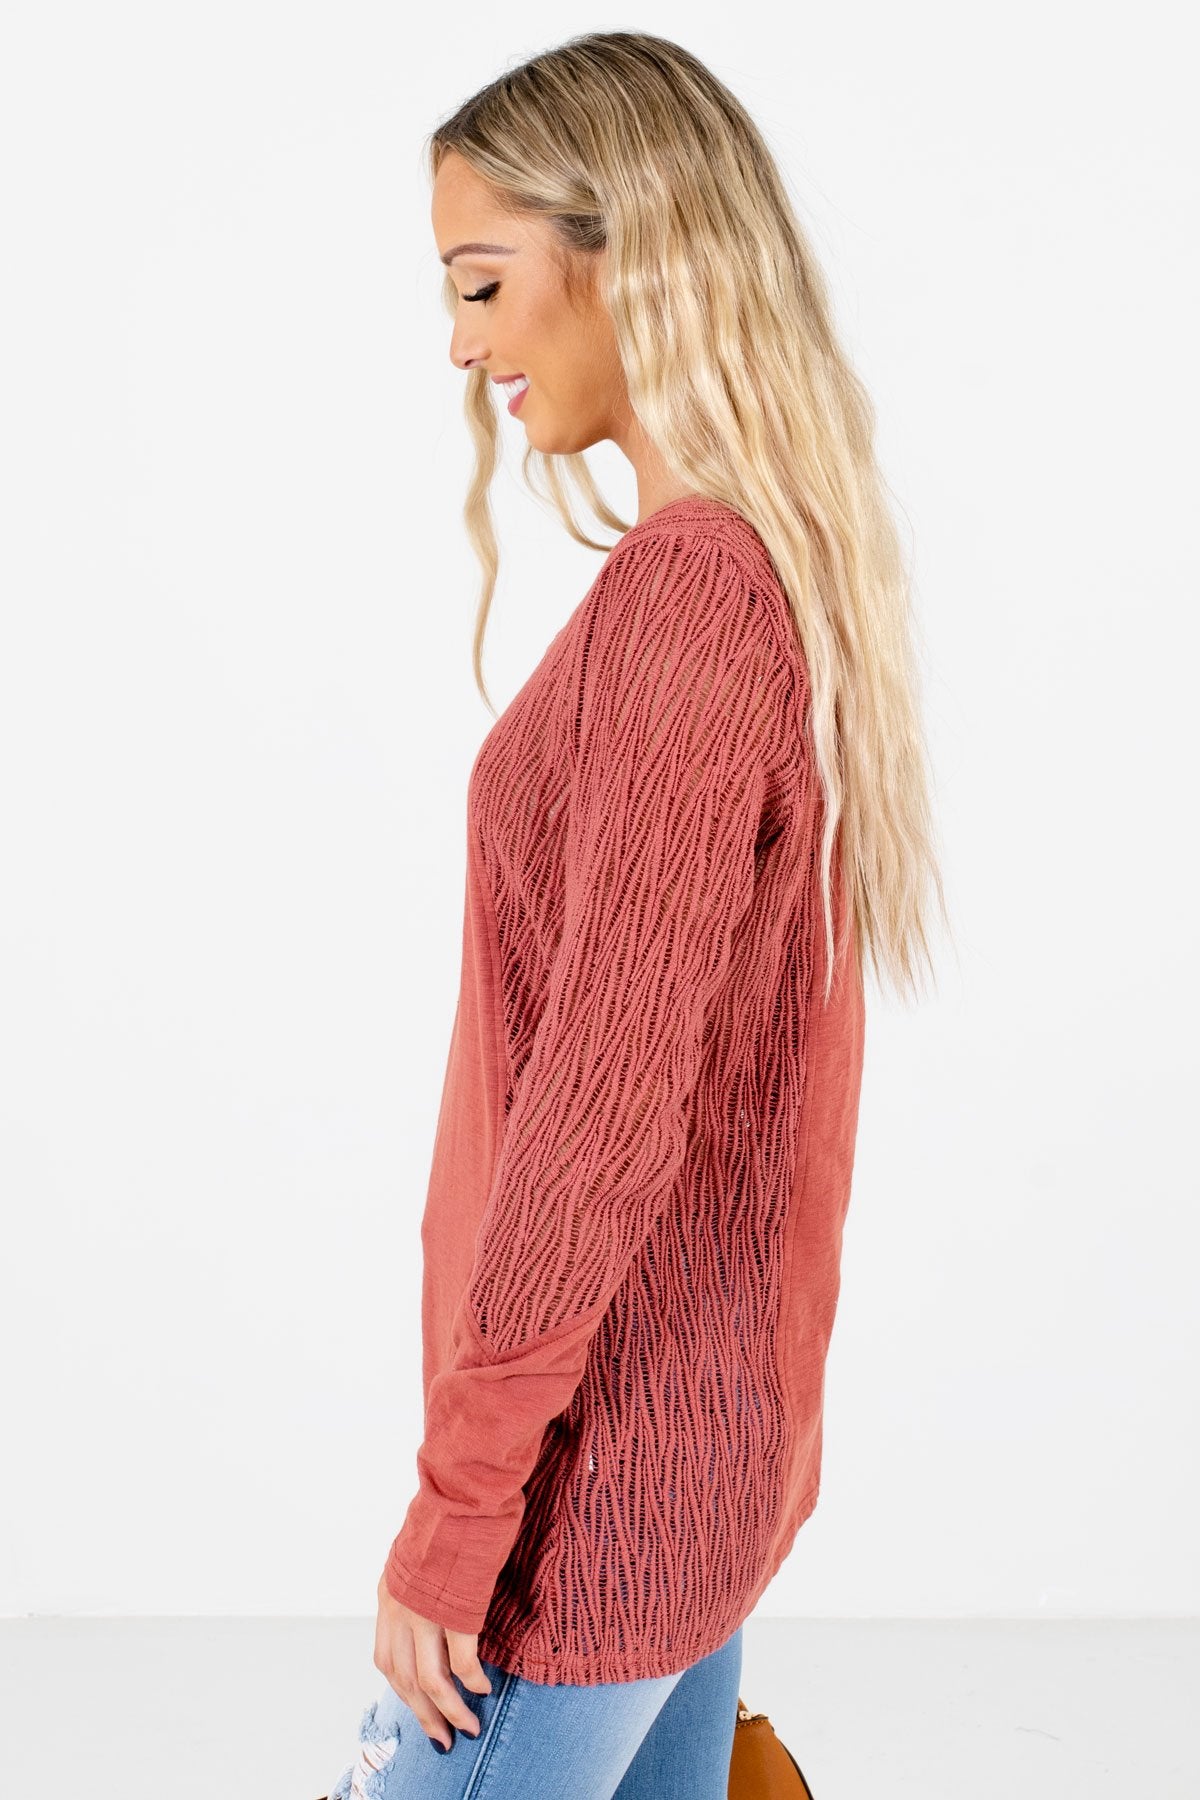 Coral Long Sleeve Boutique Tops for Women